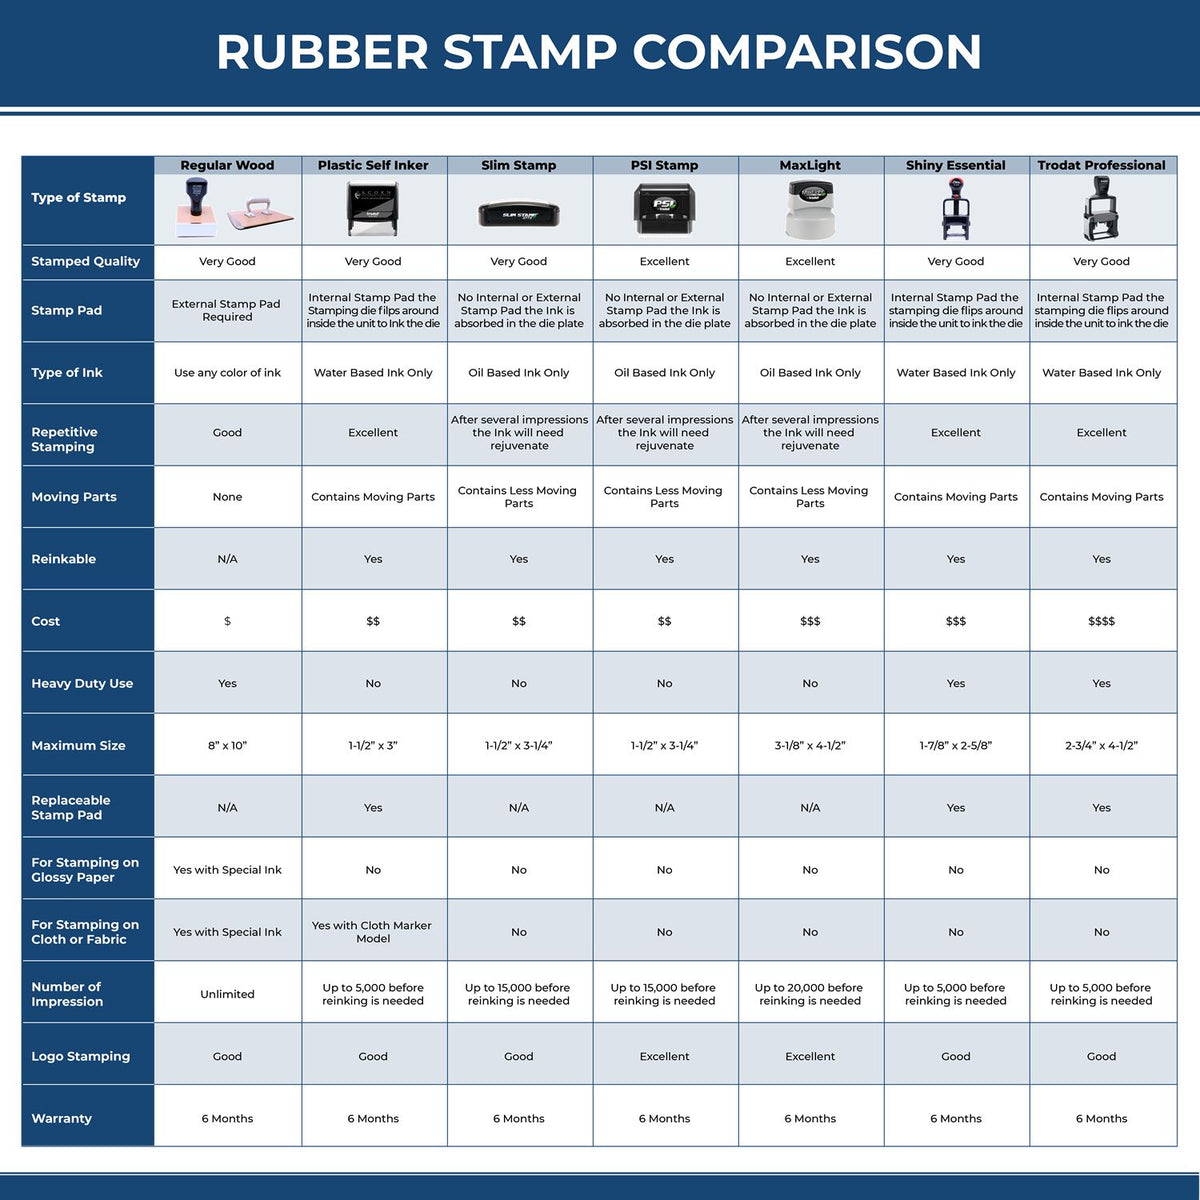 Public Weighmaster MaxLight Pre Inked Rubber Stamp of Seal 3021WE Rubber Stamp Comparison